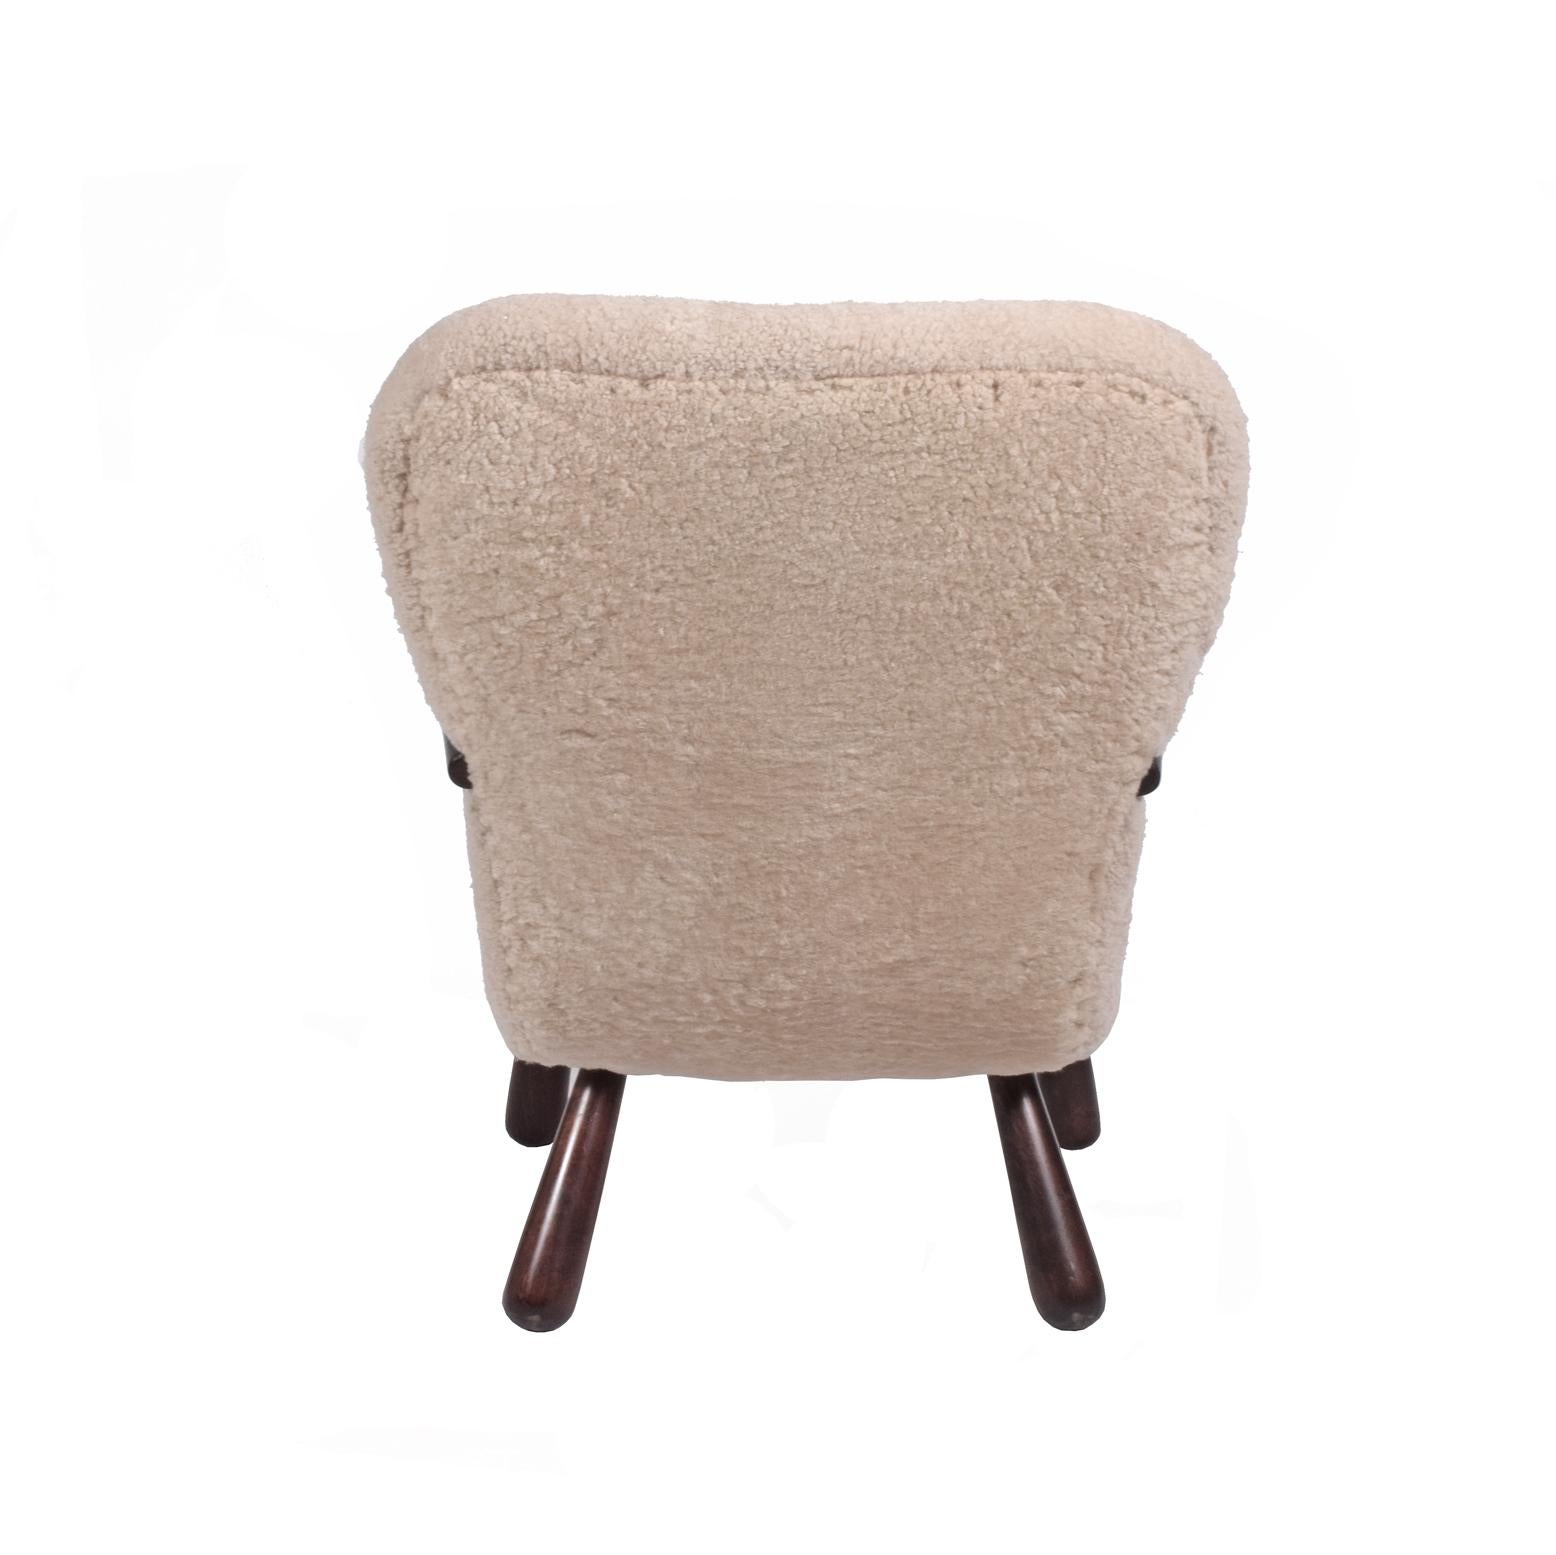 20th Century Sheepskin 'Clam' Easy Chair Attributed to Philip Arctander